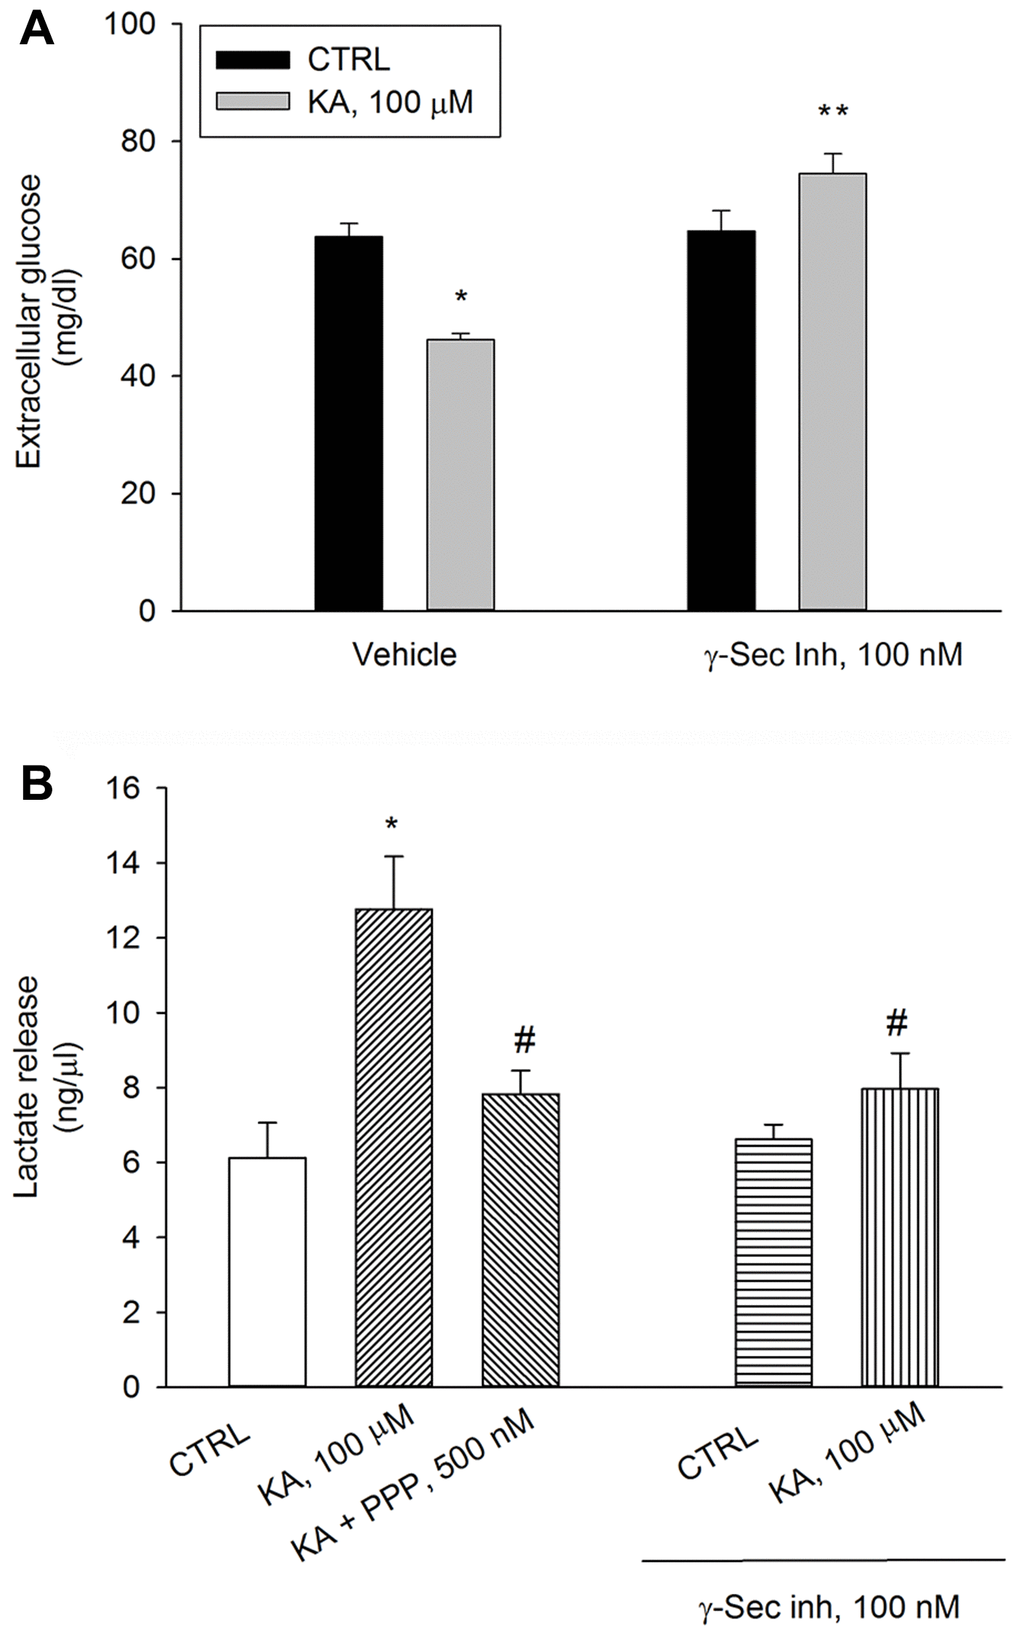 Inhibition of Aβ release or blockade of IGF-IRs prevent kainate-stimulated lactate release. Following 2 hours of glucose deprivation, 3 mM glucose was added to neuronal cultures. A treatment with kainate (KA, 100 μM) stimulated glucose uptake after 10 min (A) and lactate release after 40 min (B). Glucose consumption was measured as glucose (mg/dl) remaining in the incubation buffer 10 minutes following re-addition. With respect to the initial 3 mM glucose concentration, no glucose uptake occurred within 10 min unless KA was added. The IGF-IR antagonist, PPP (500 nM), and γ-secretase inhibitor IX (γ-Sec Inh, 100 nM) prevented kainate-stimulated lactate release at 40 min (B). Bars represent the means ± SEM of 4 determinations. In (A) p *control (CTRL) or **KA alone. In (B) p *CTRL or #KA alone; one-way ANOVA with post hoc Fisher LSD multiple comparison method.